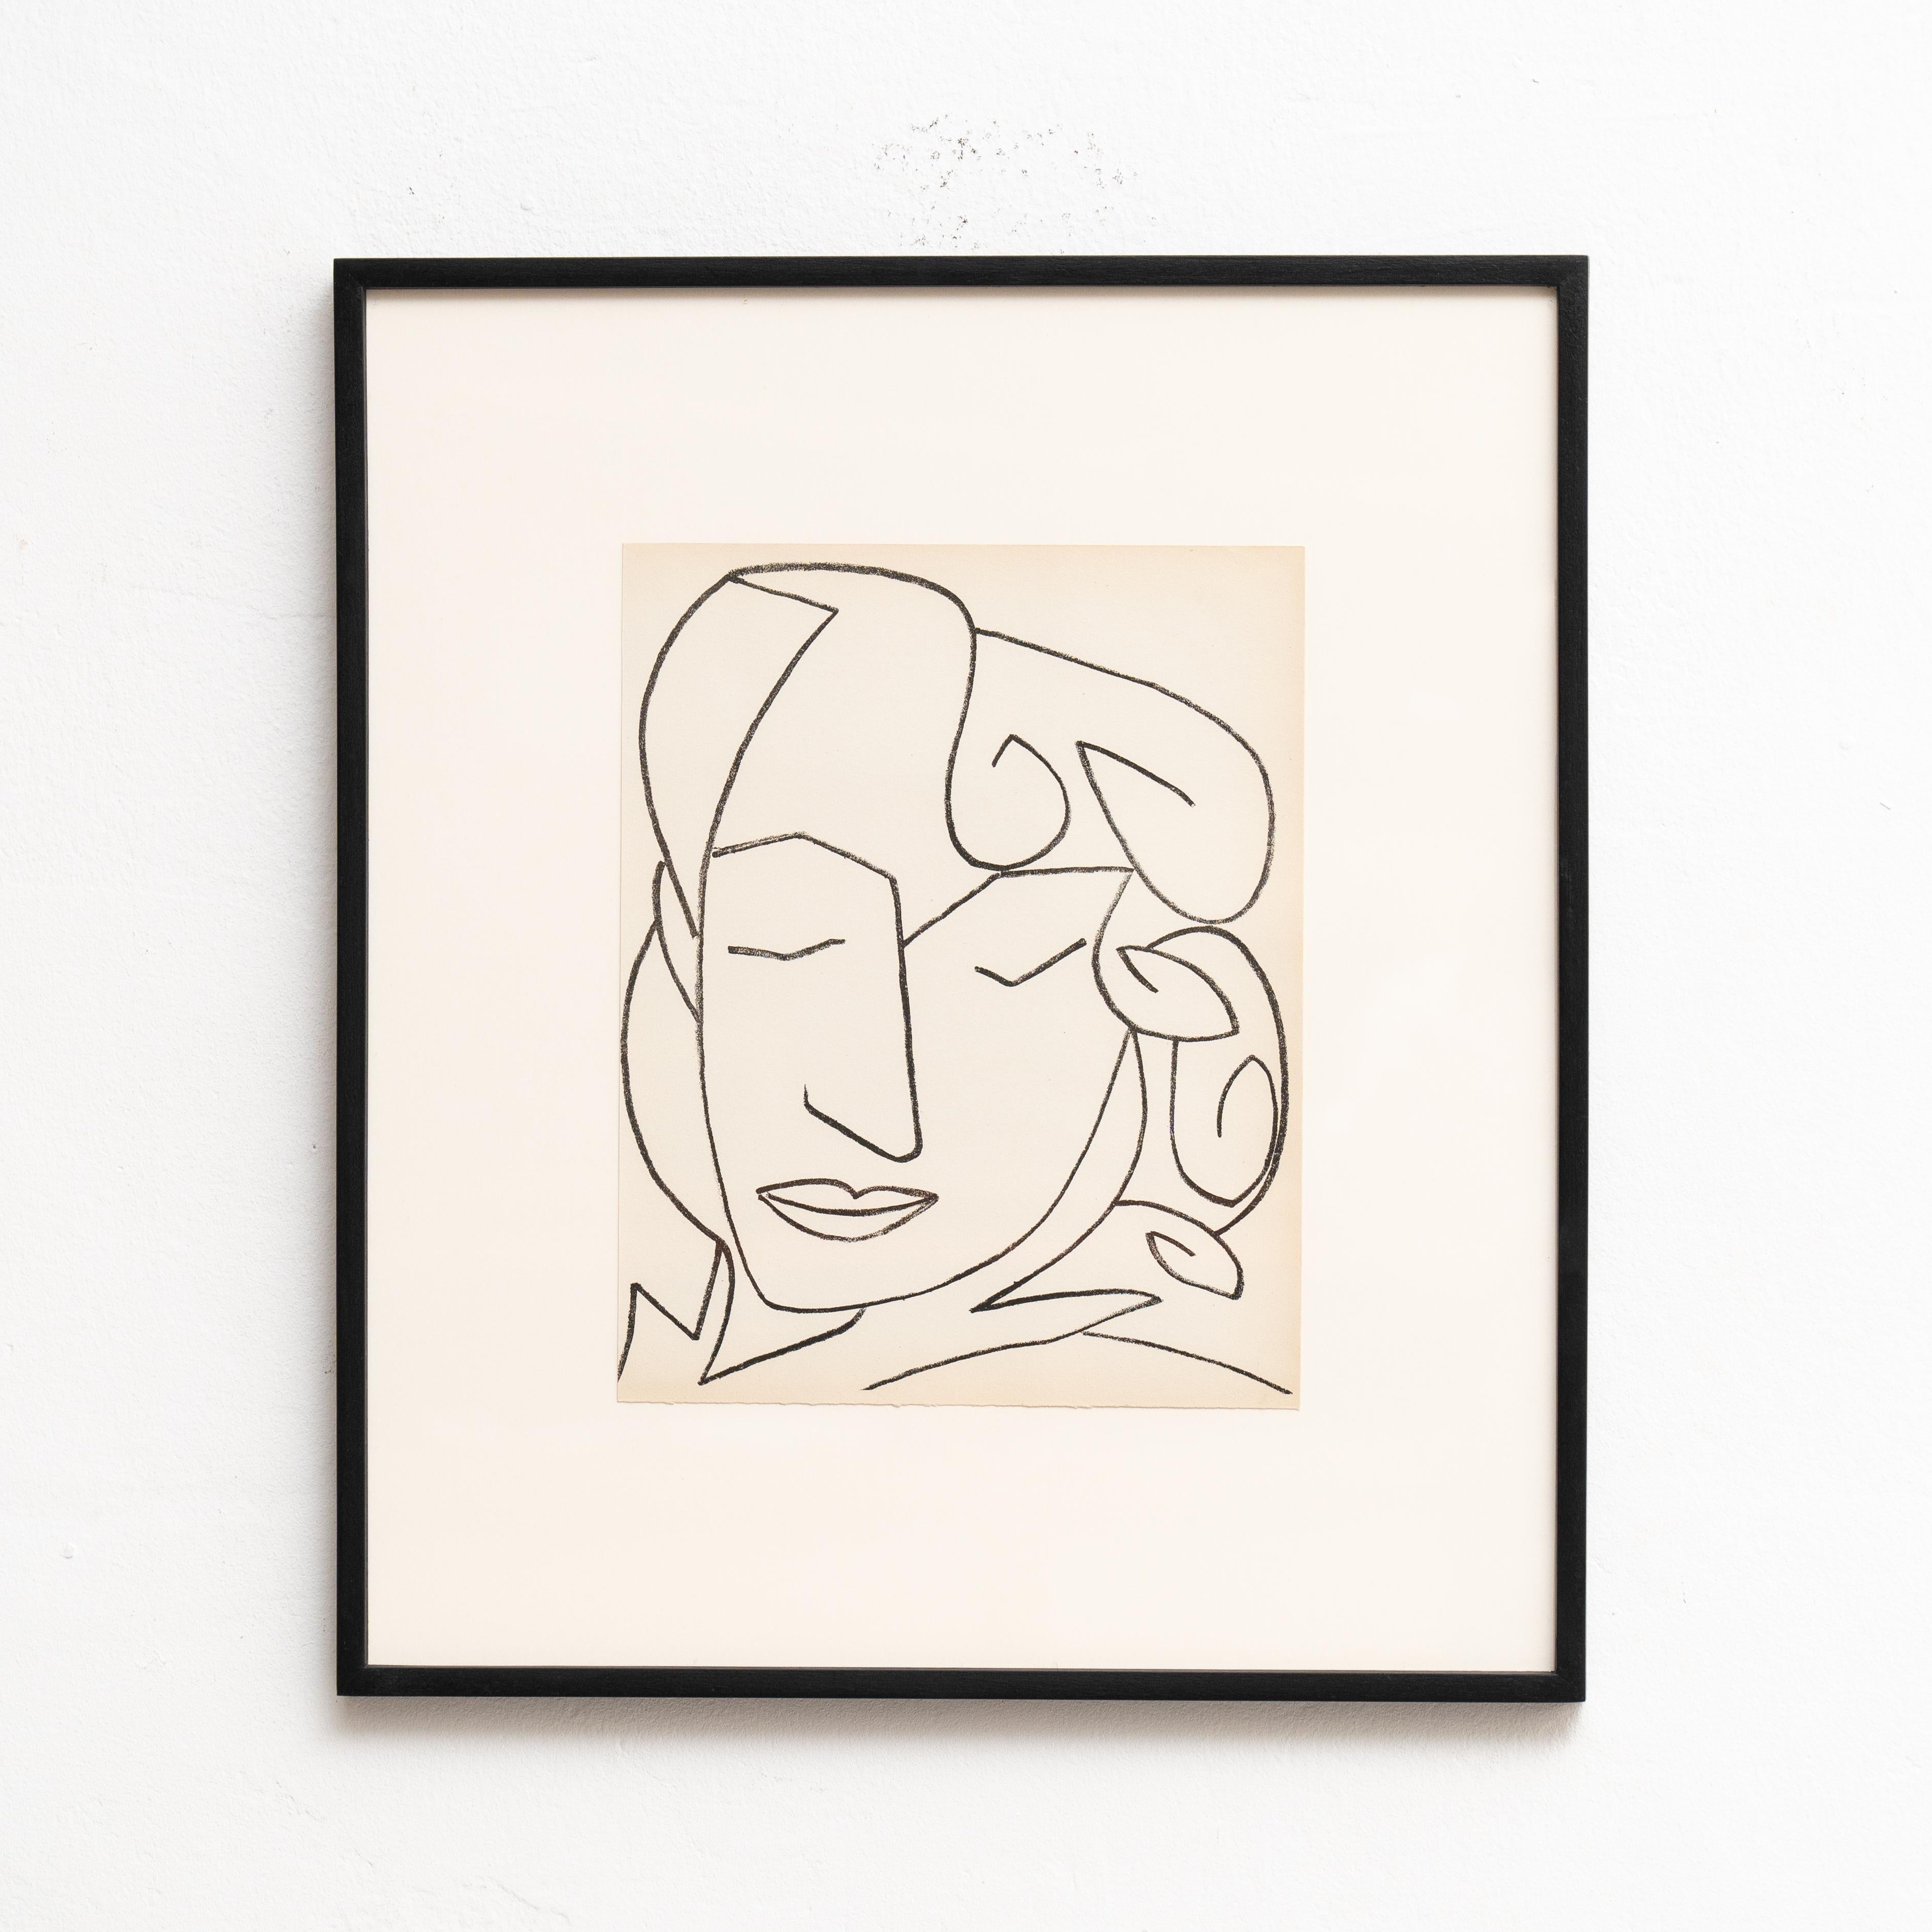 Introducing an exquisite François Gilot original lithograph from the pages of André VERDET's poetic masterpiece, 